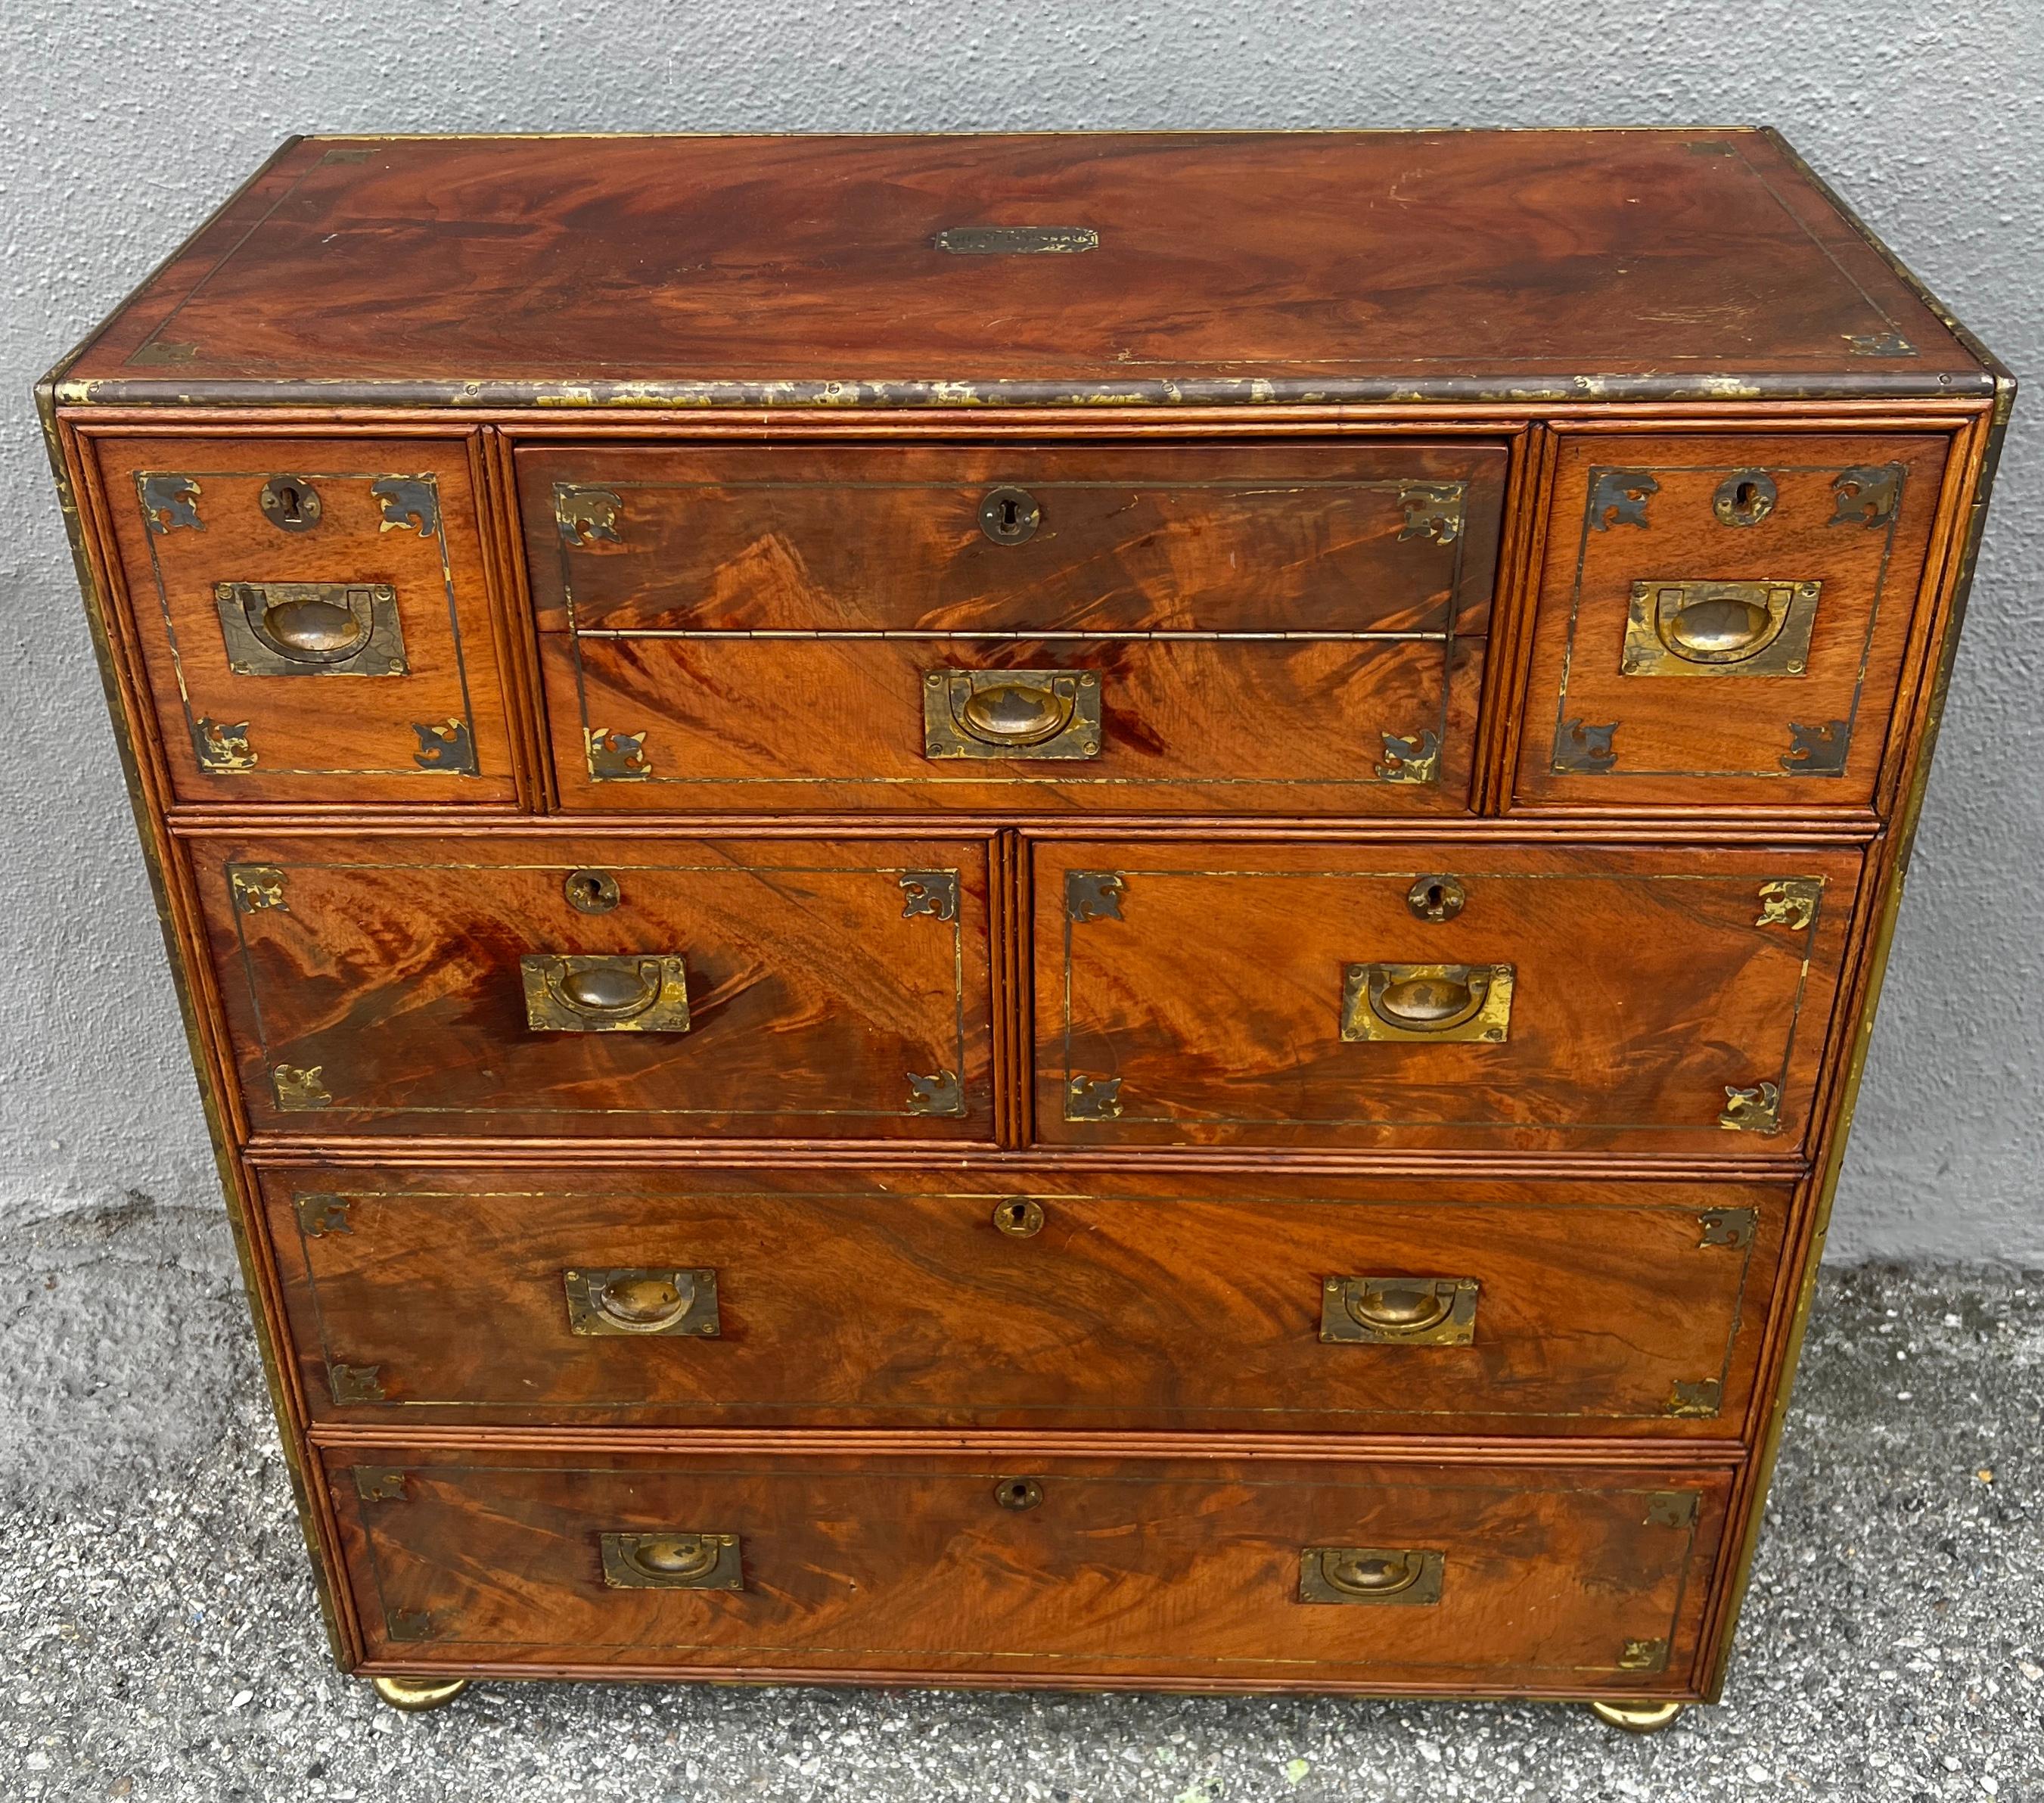 English Anglo Raj Regency Campaign Chest with Desk Trimmed in Brass Banding Accents 1811 For Sale